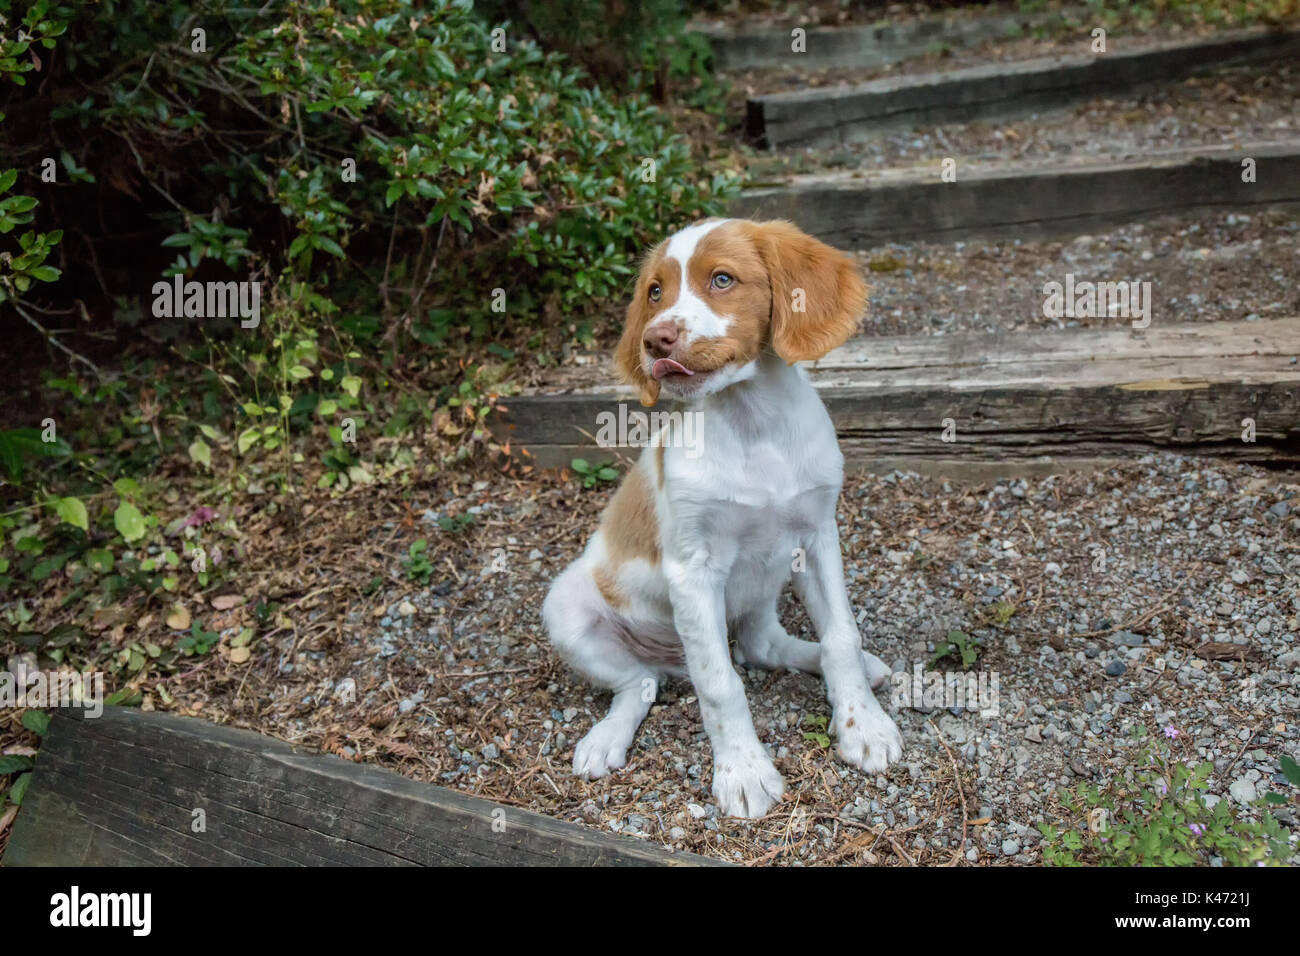 Two month old Brittany Spaniel 'Archie' sitting on a rocky path in his yard in Issaquah, Washington, USA Stock Photo